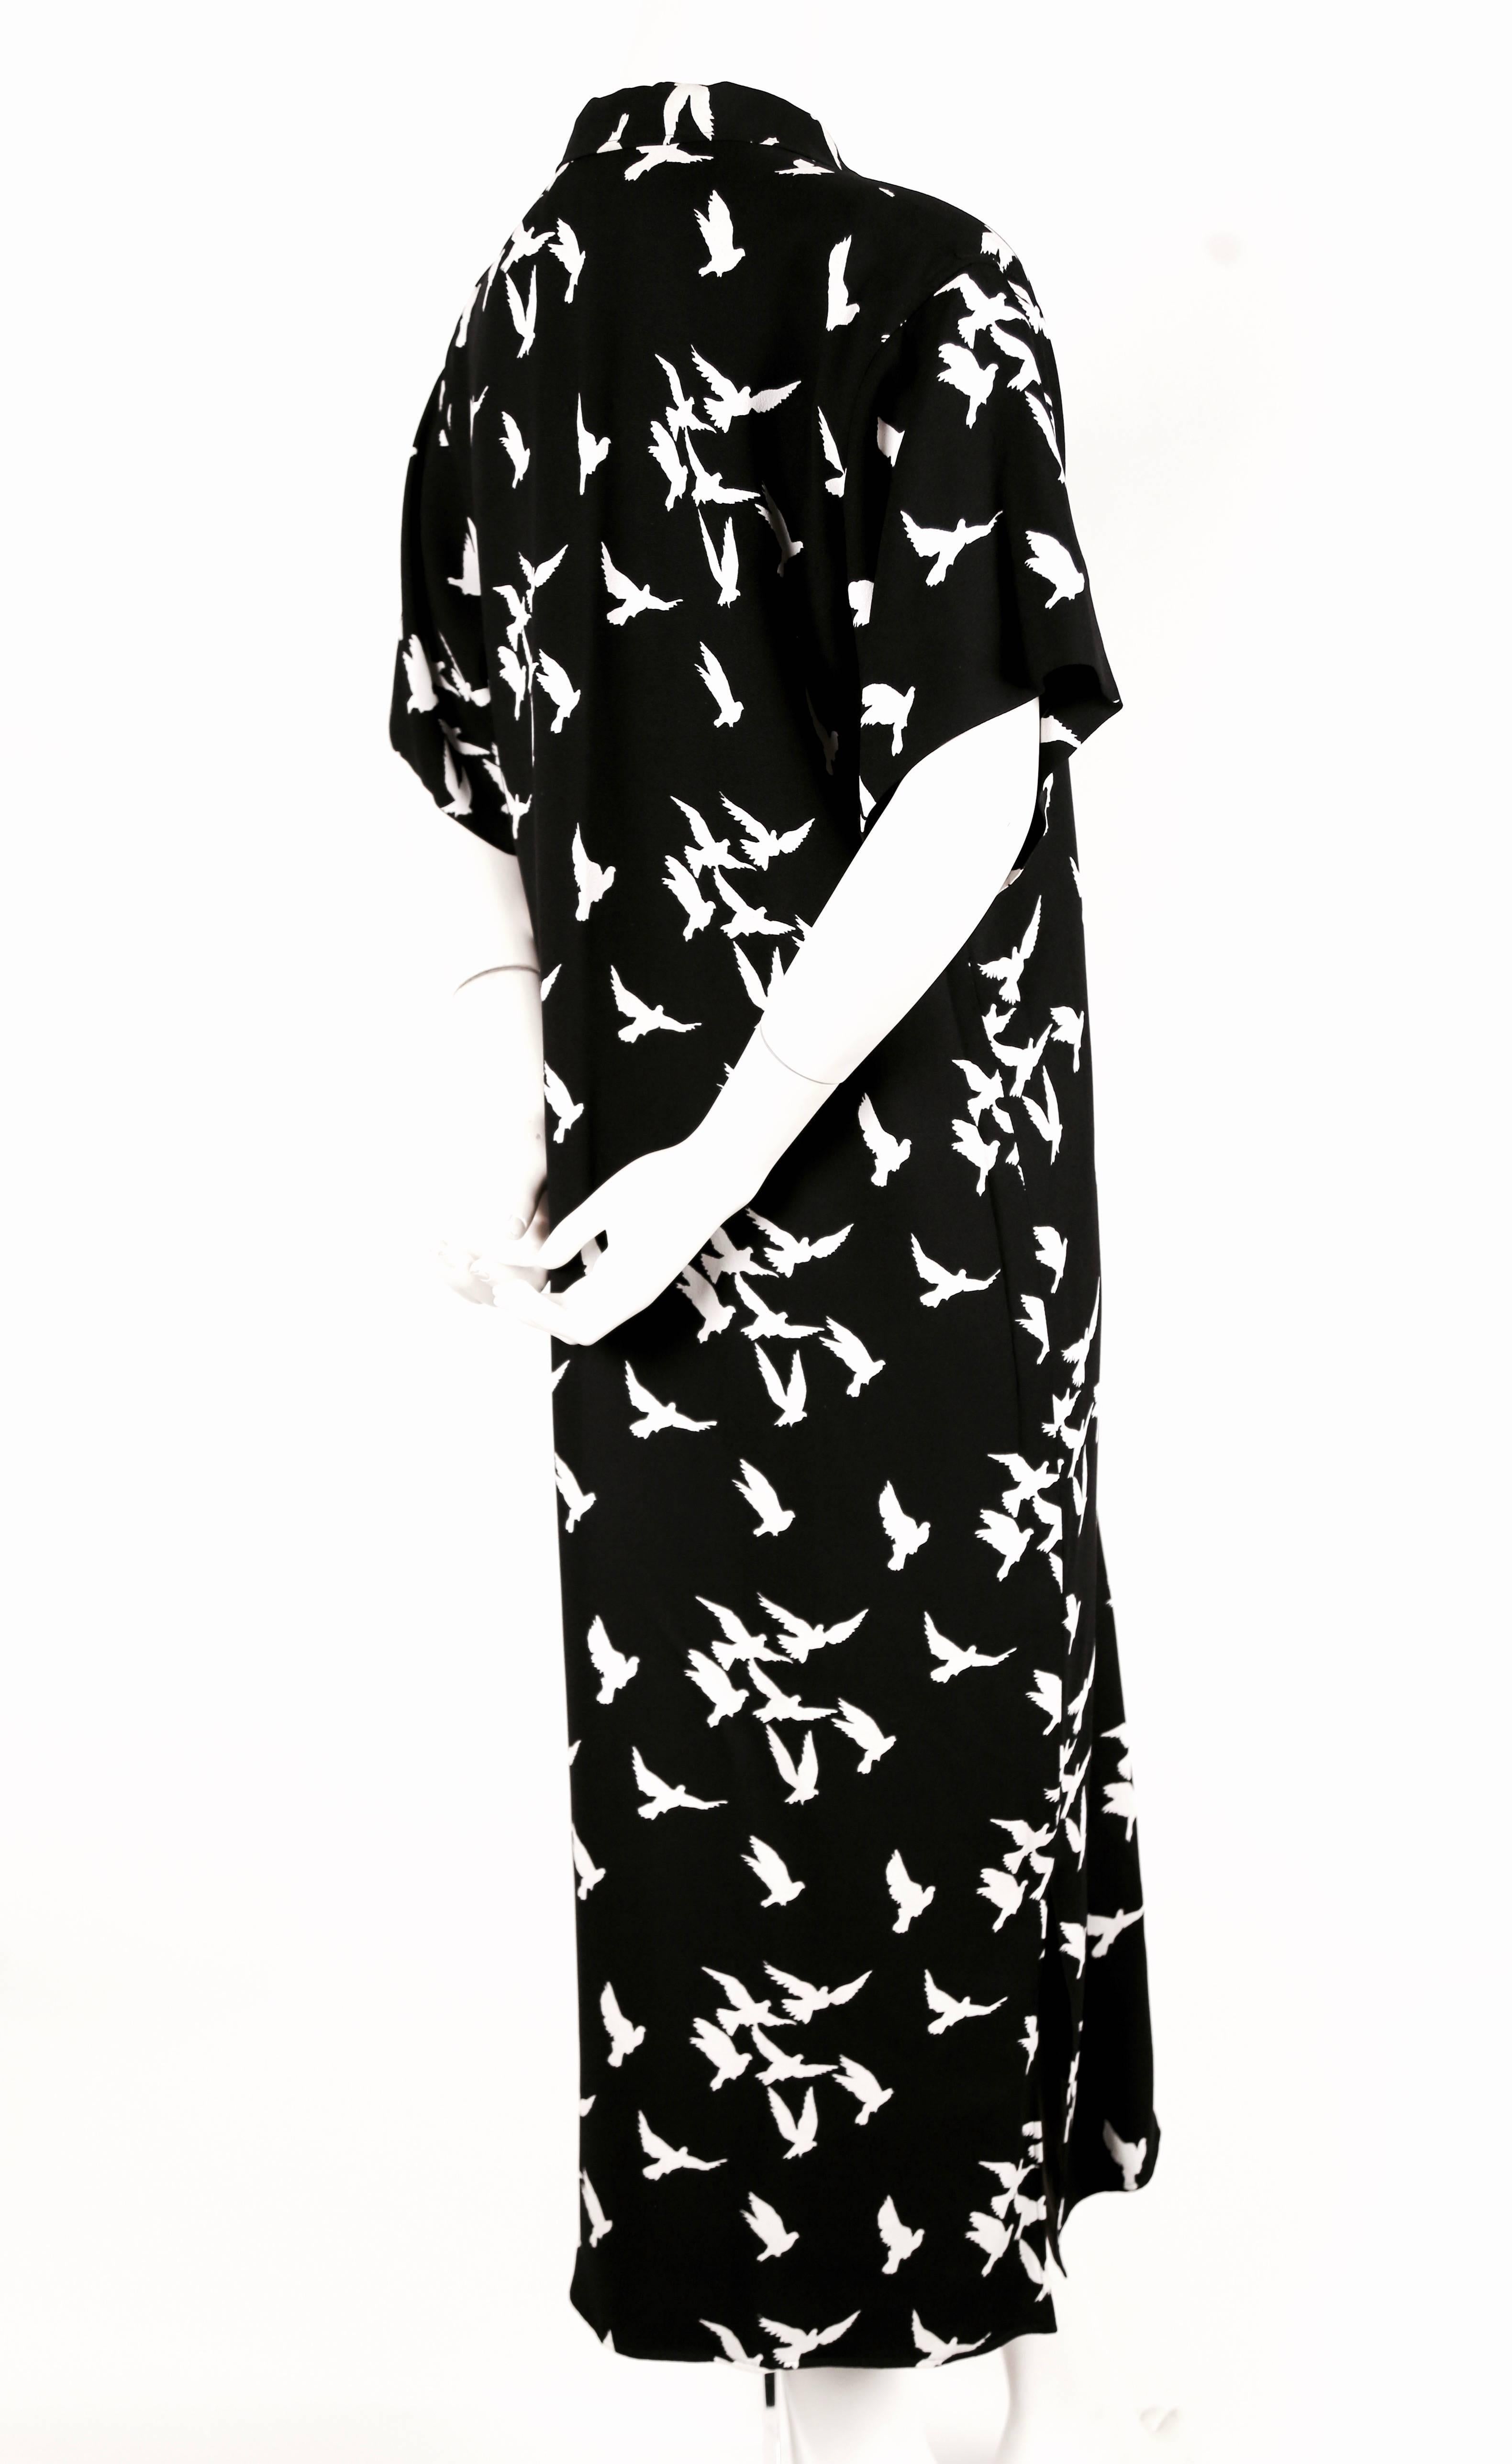 Jet black crepe printed dress with white birds from Yves Saint Laurent dating to 1978. No size is indicated however this dress best fits a US 4 to 8. Approximate measurements: shoulder 18", bust 40", hips 41", length 50". Slits